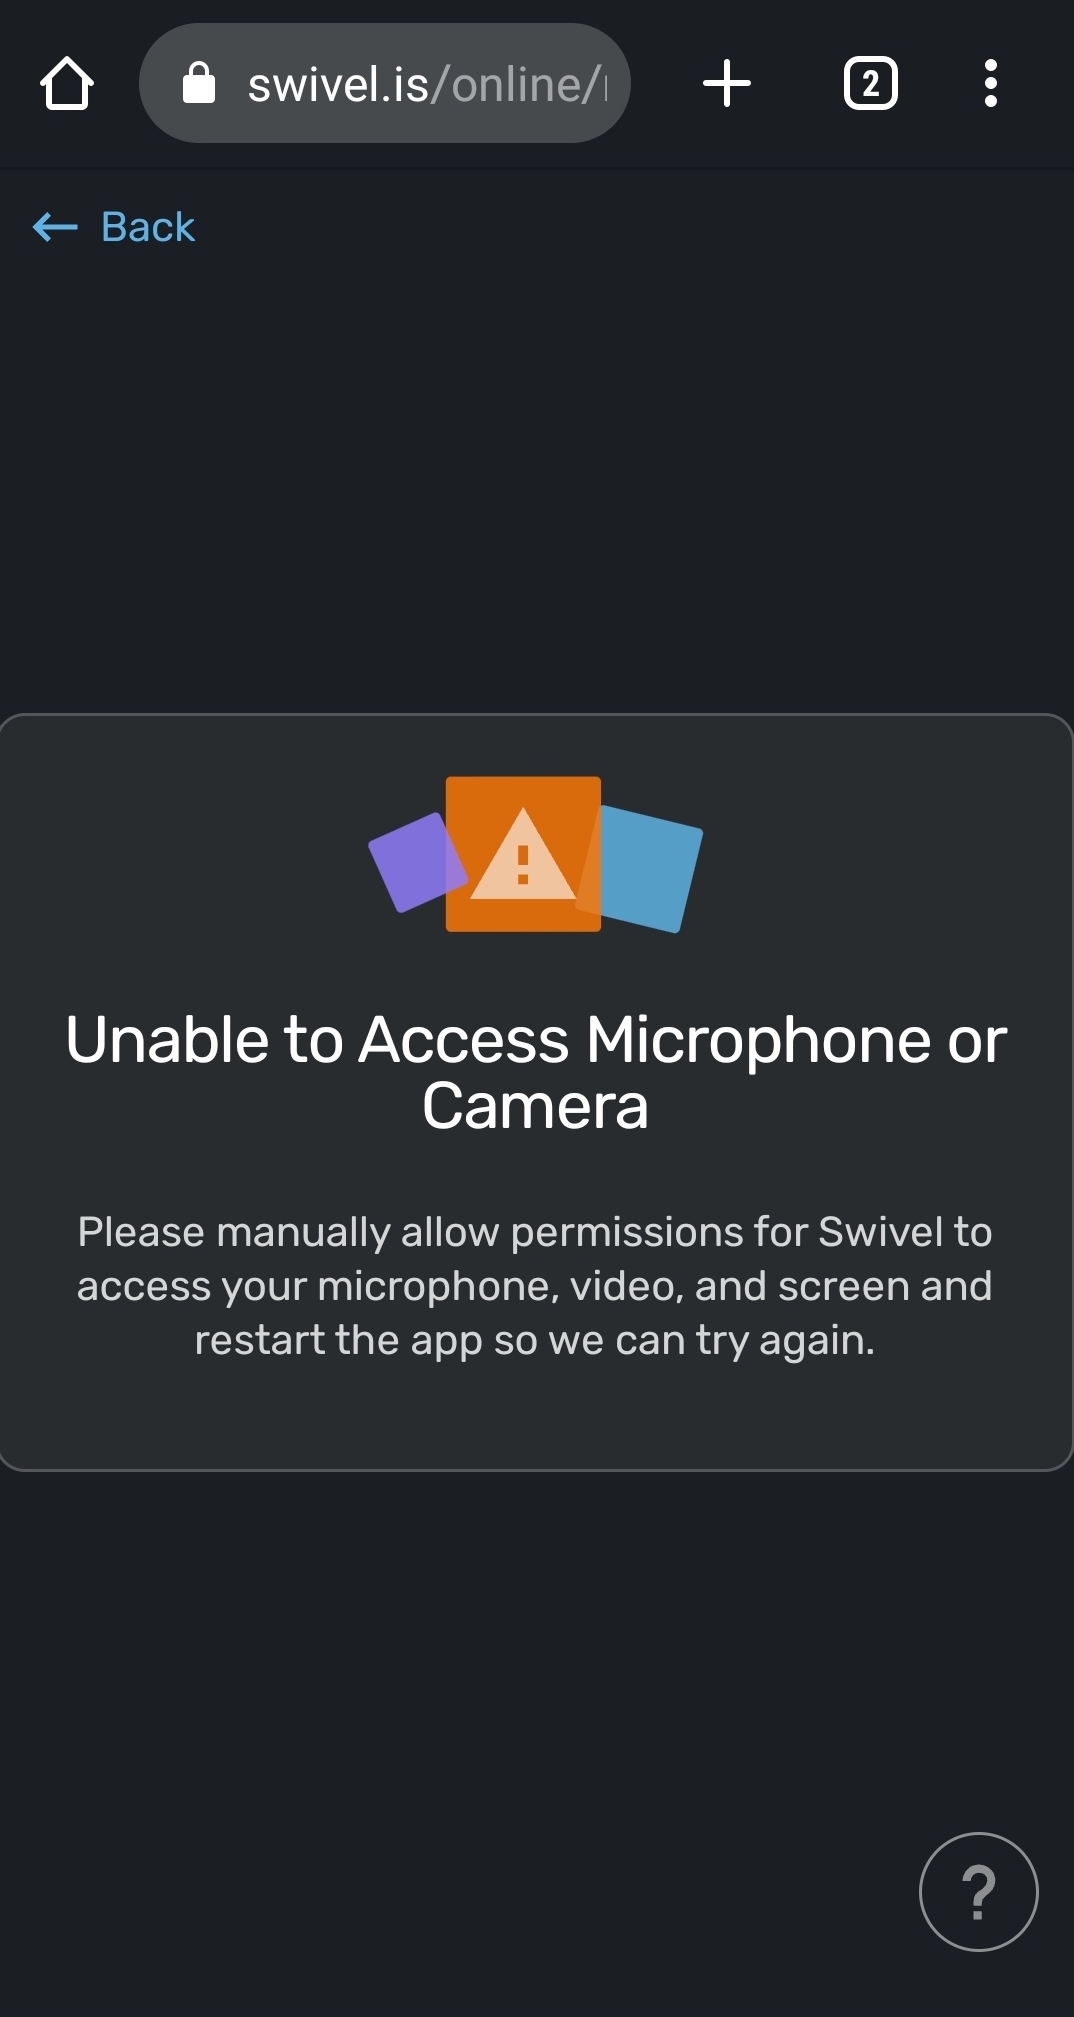 13__Unable_to_Access_Microphone_or_Camera_revisit.jpg